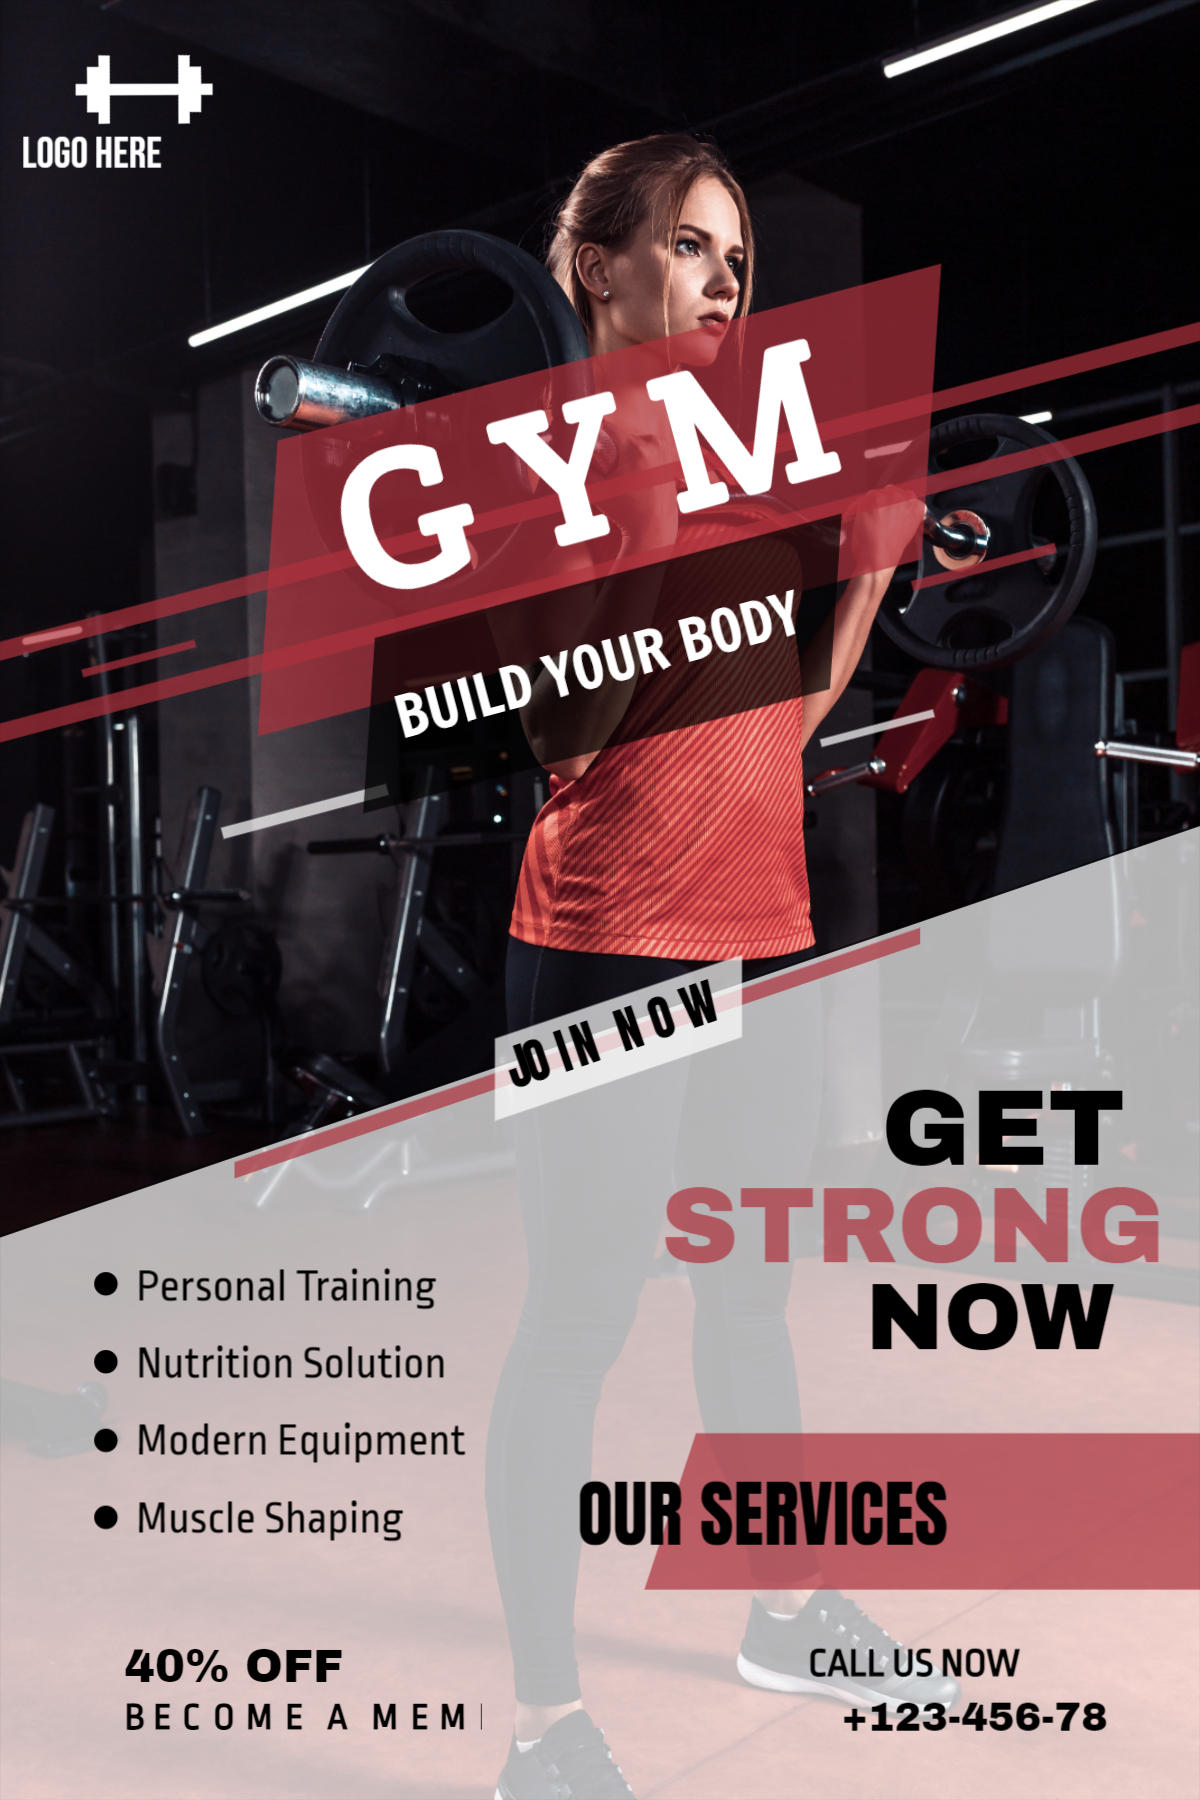 Gym Poster design download for free